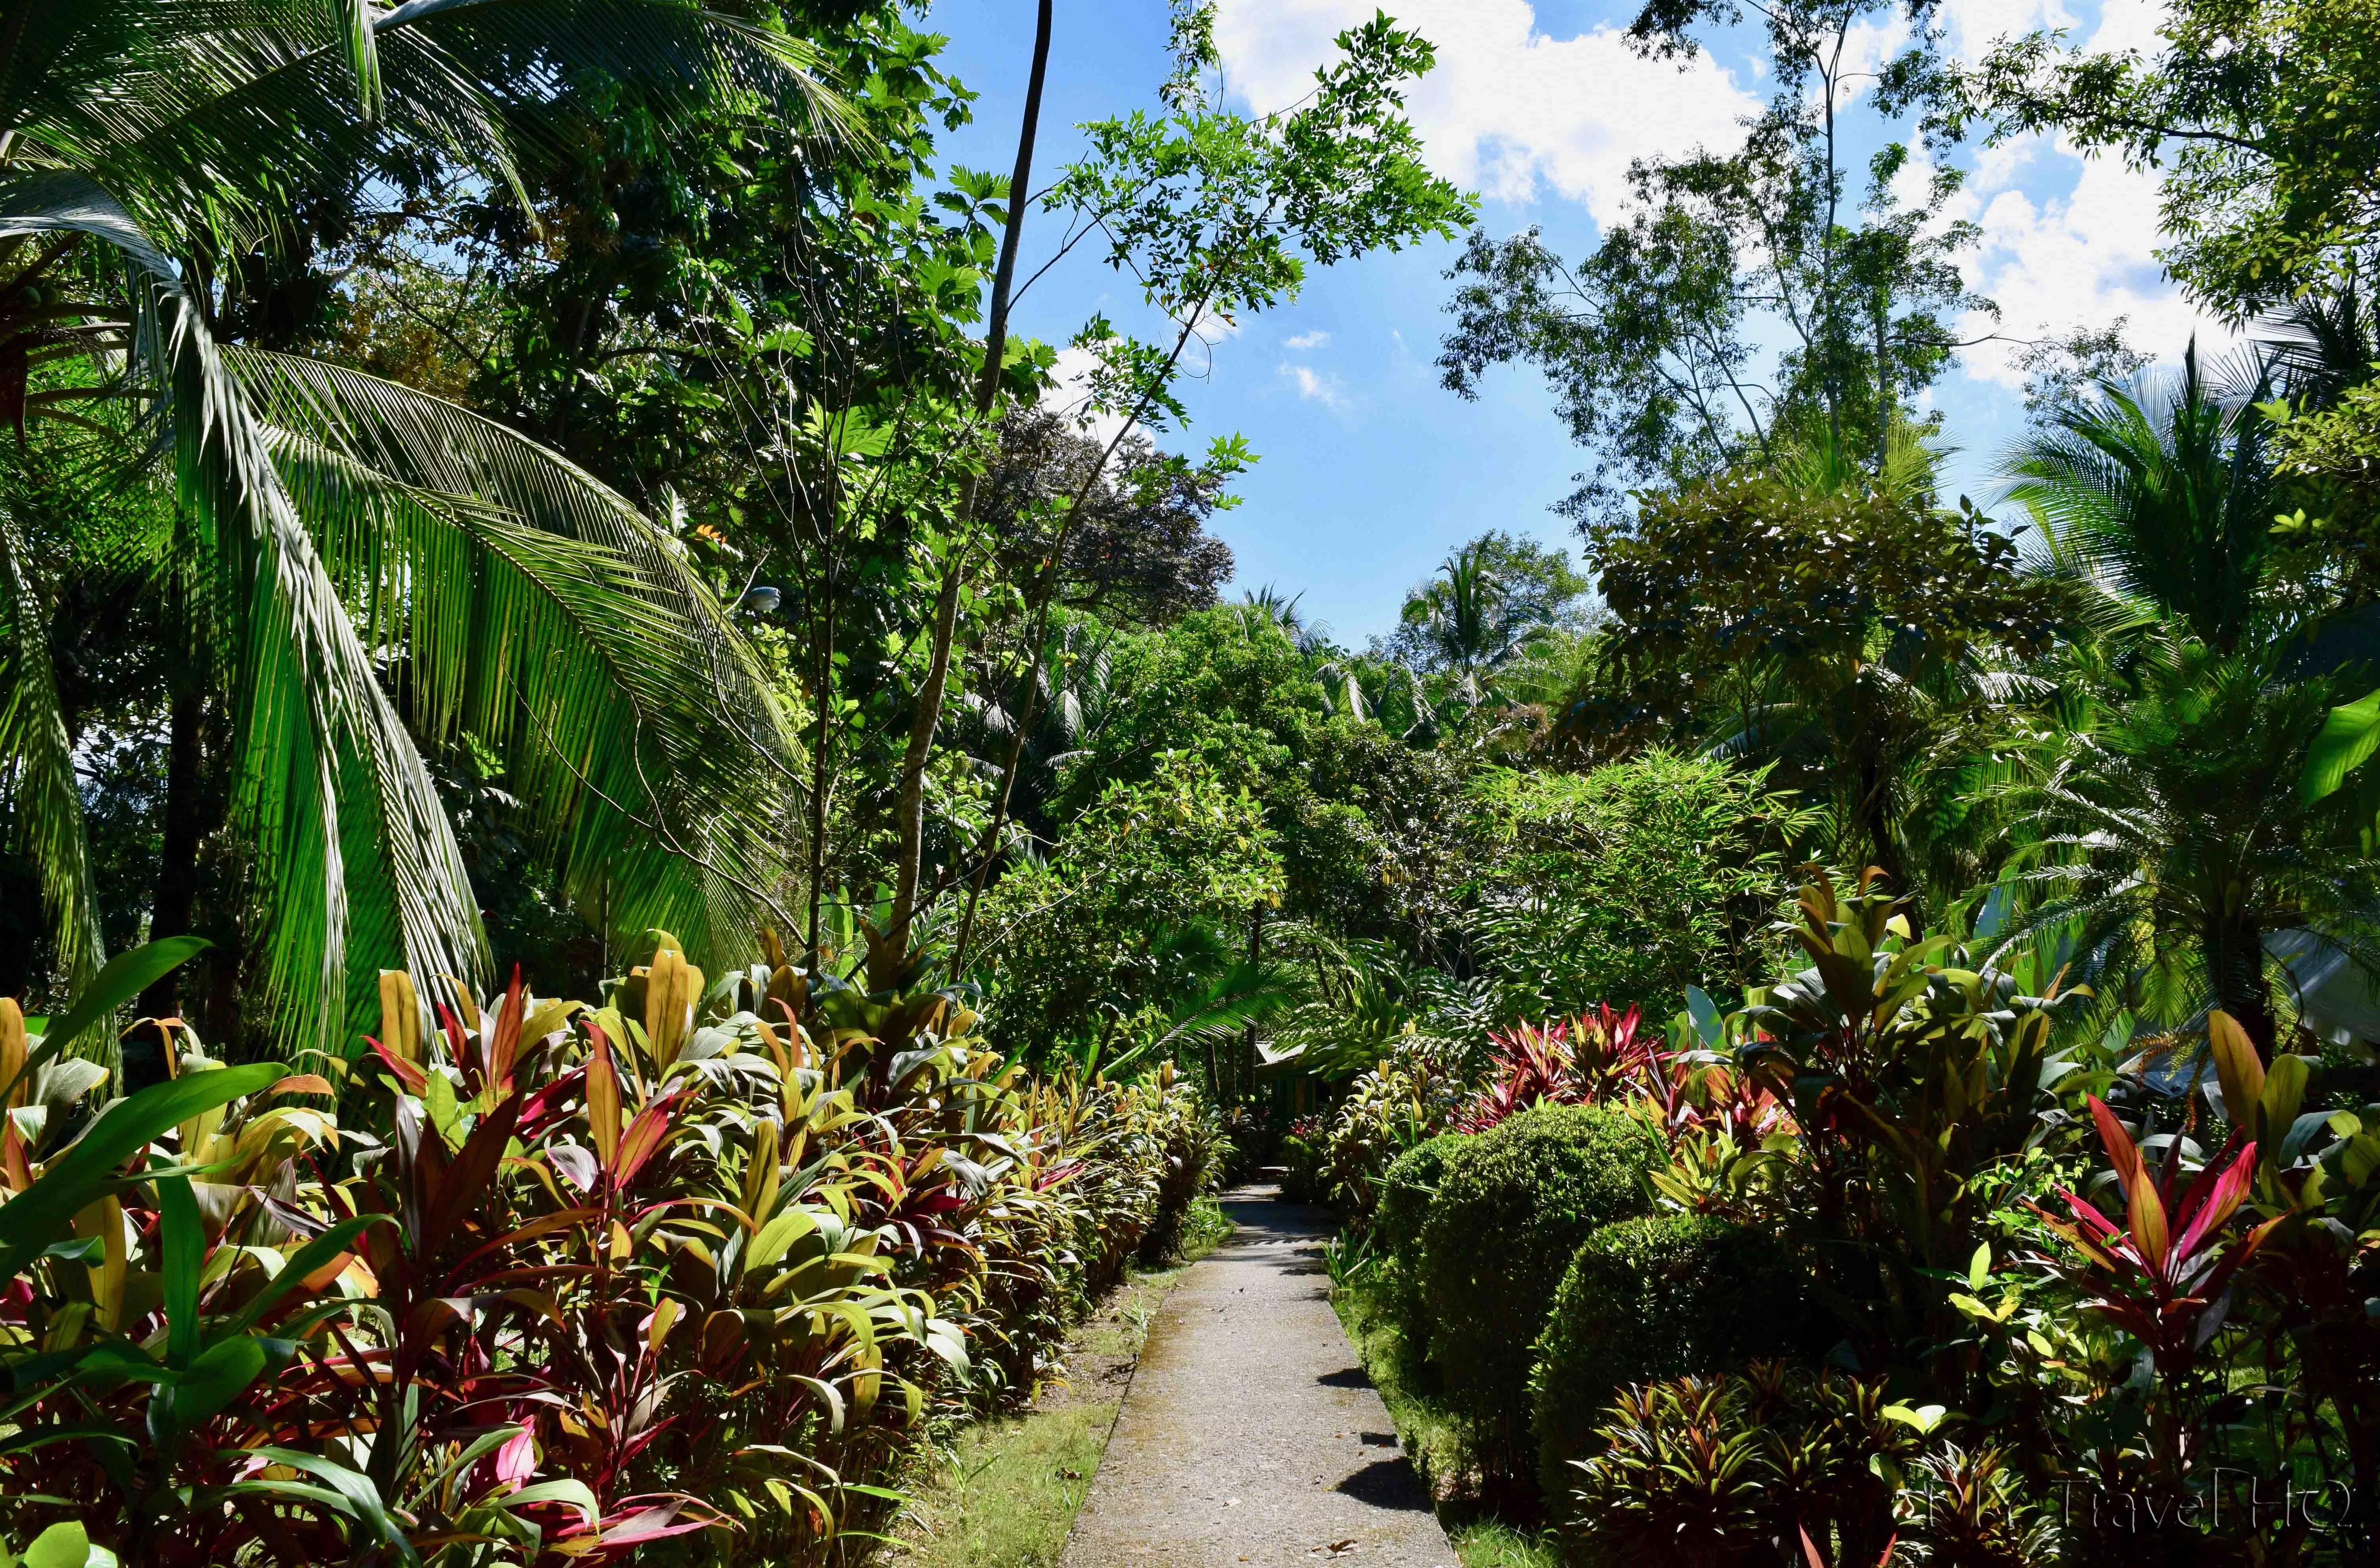 Victoria Botanical Gardens in Republic of Seychelles, Africa | Botanical Gardens - Rated 3.5